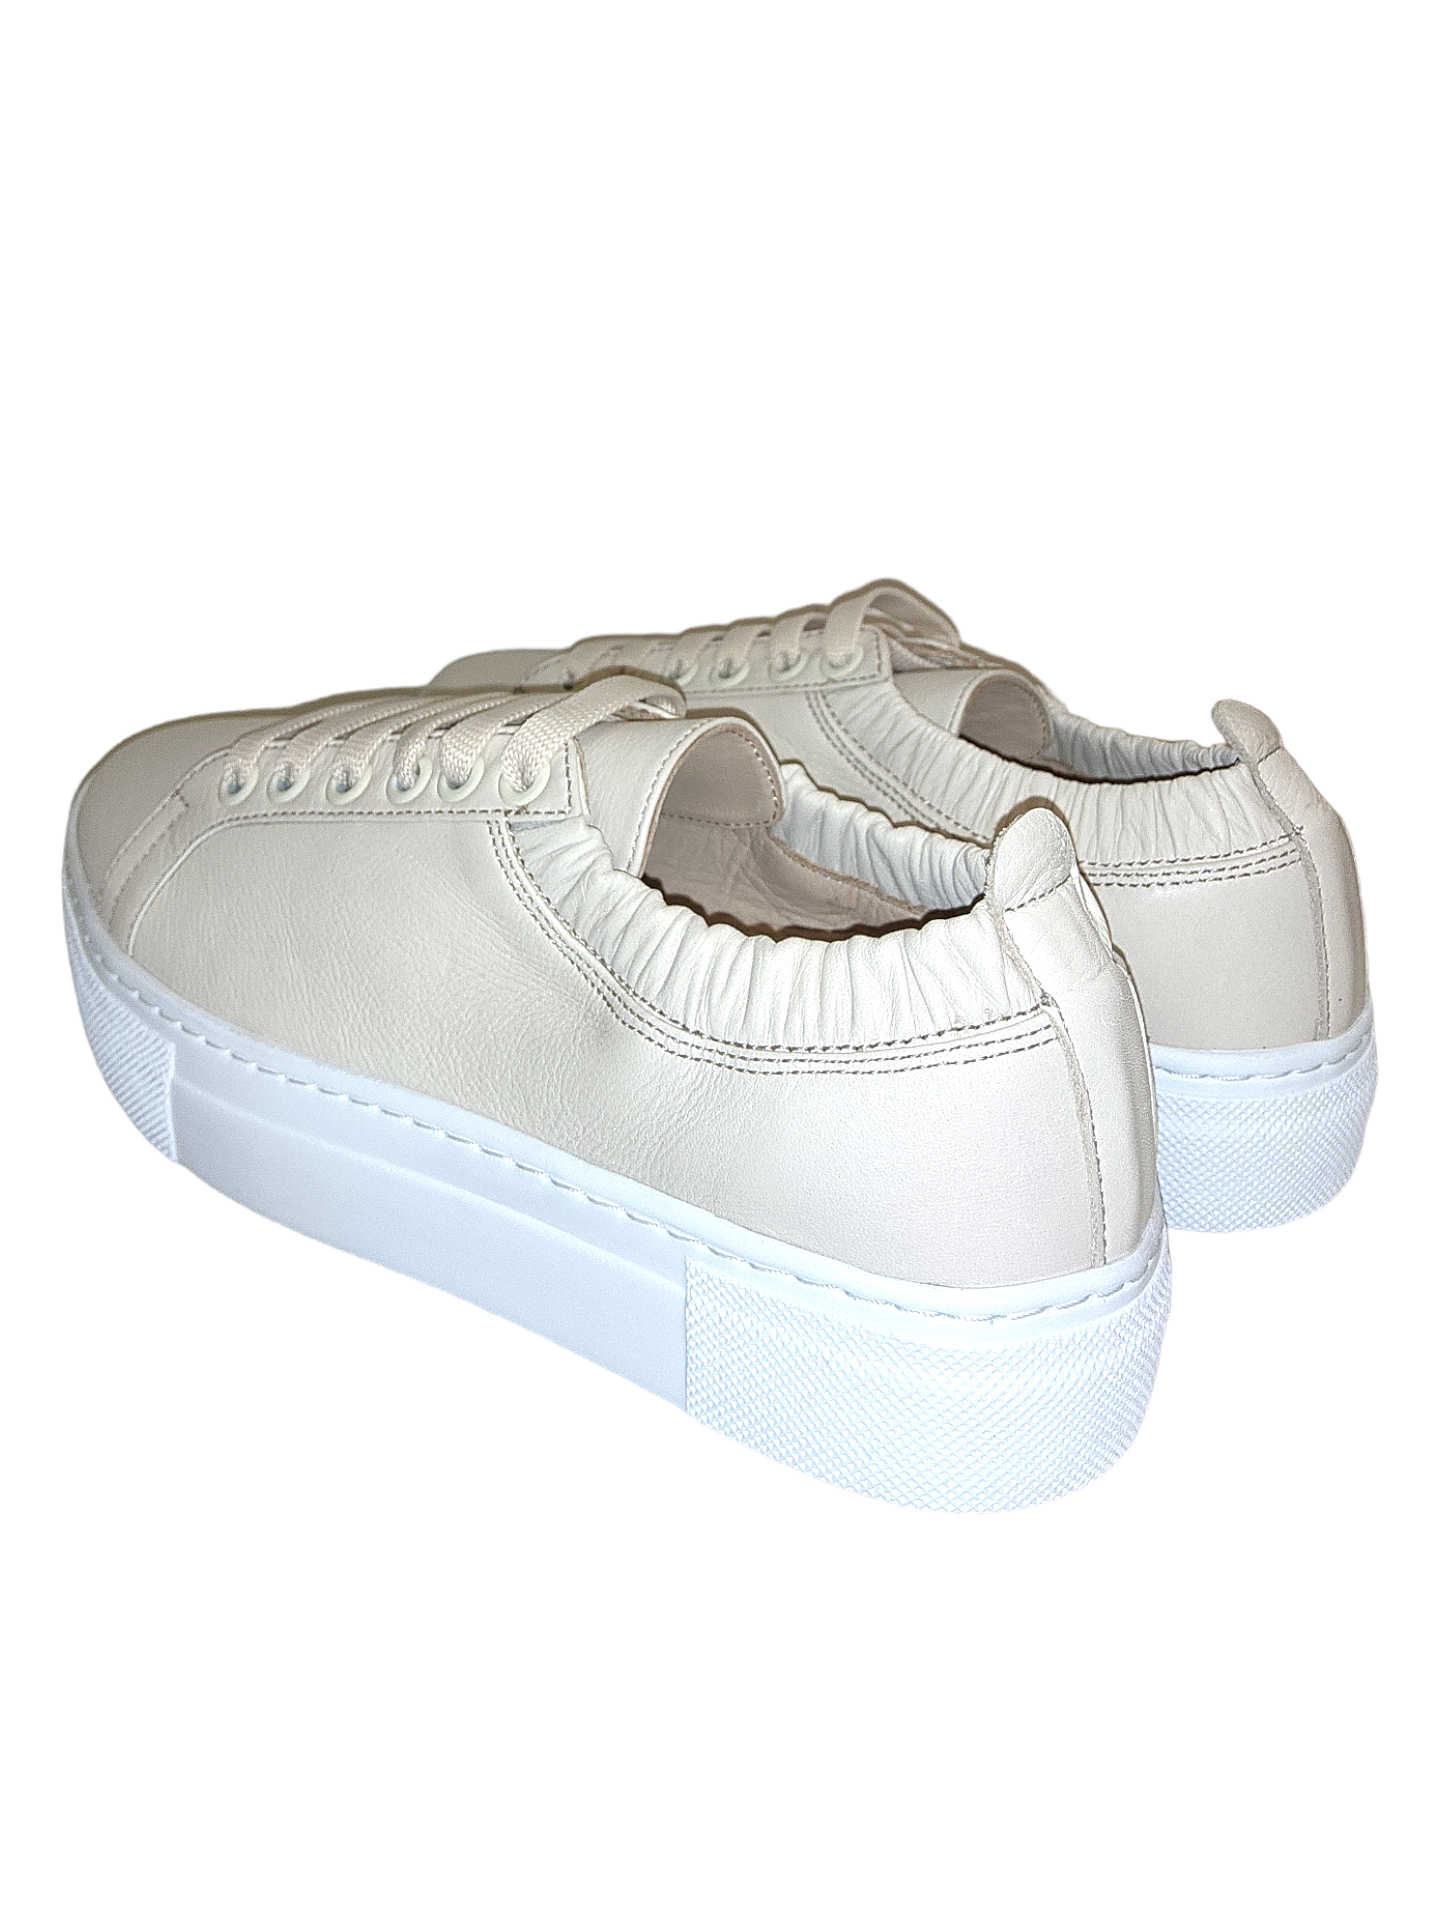 Cream leather sneakers